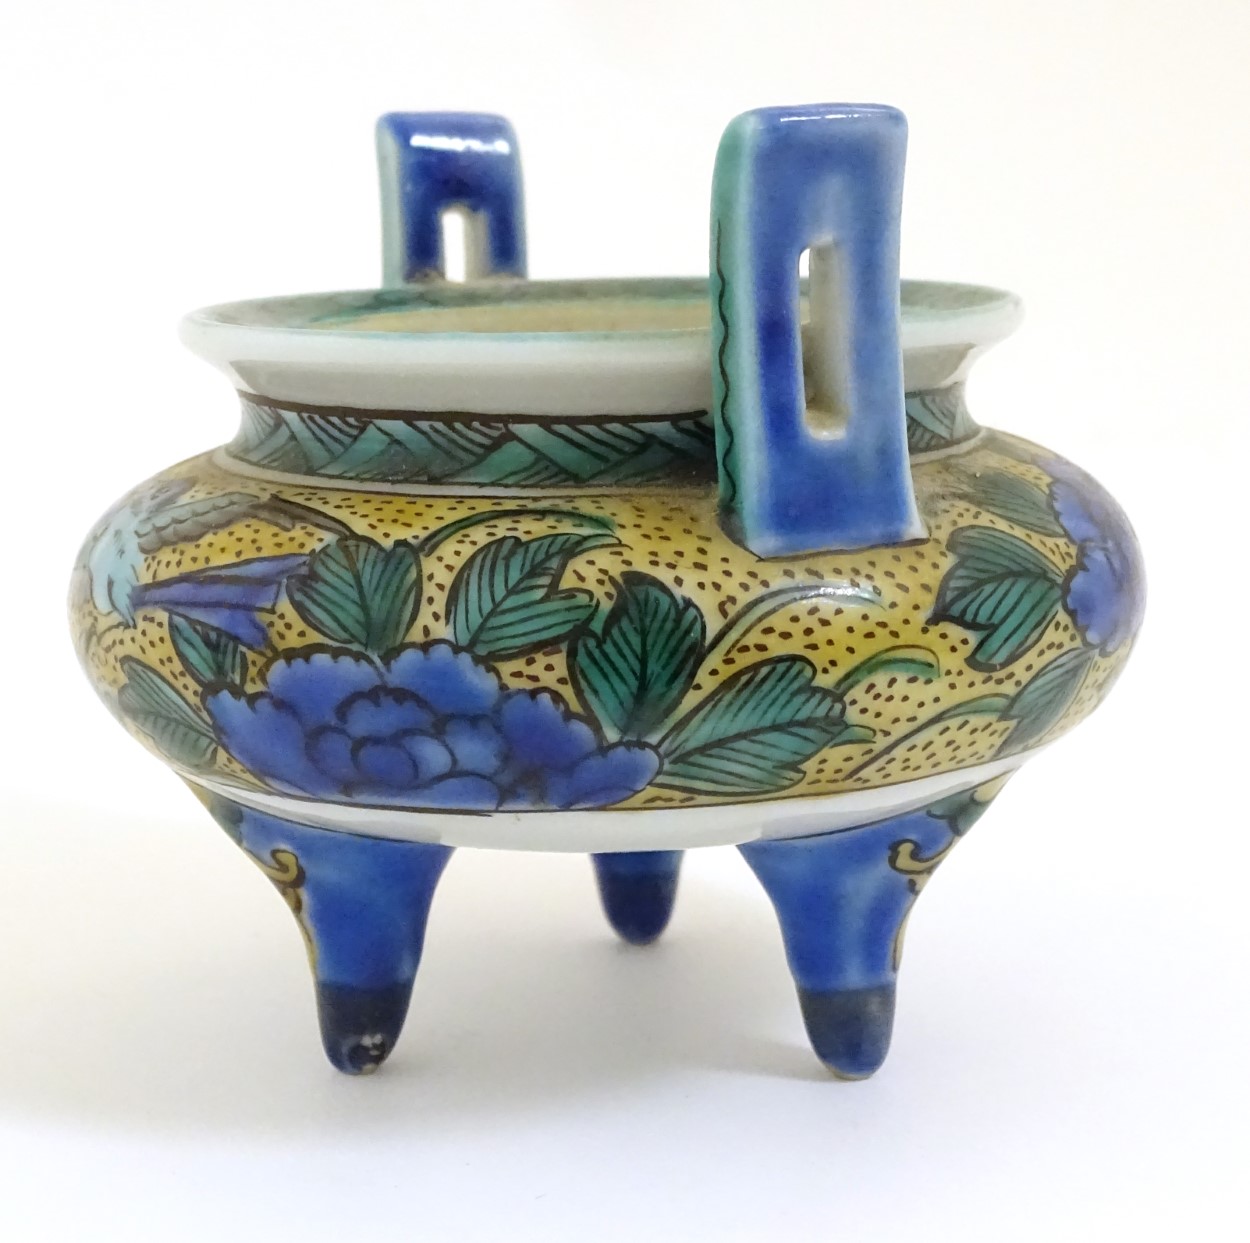 A Chinese three legged, two handled censer, decorated with a bird and flowers. - Image 5 of 7